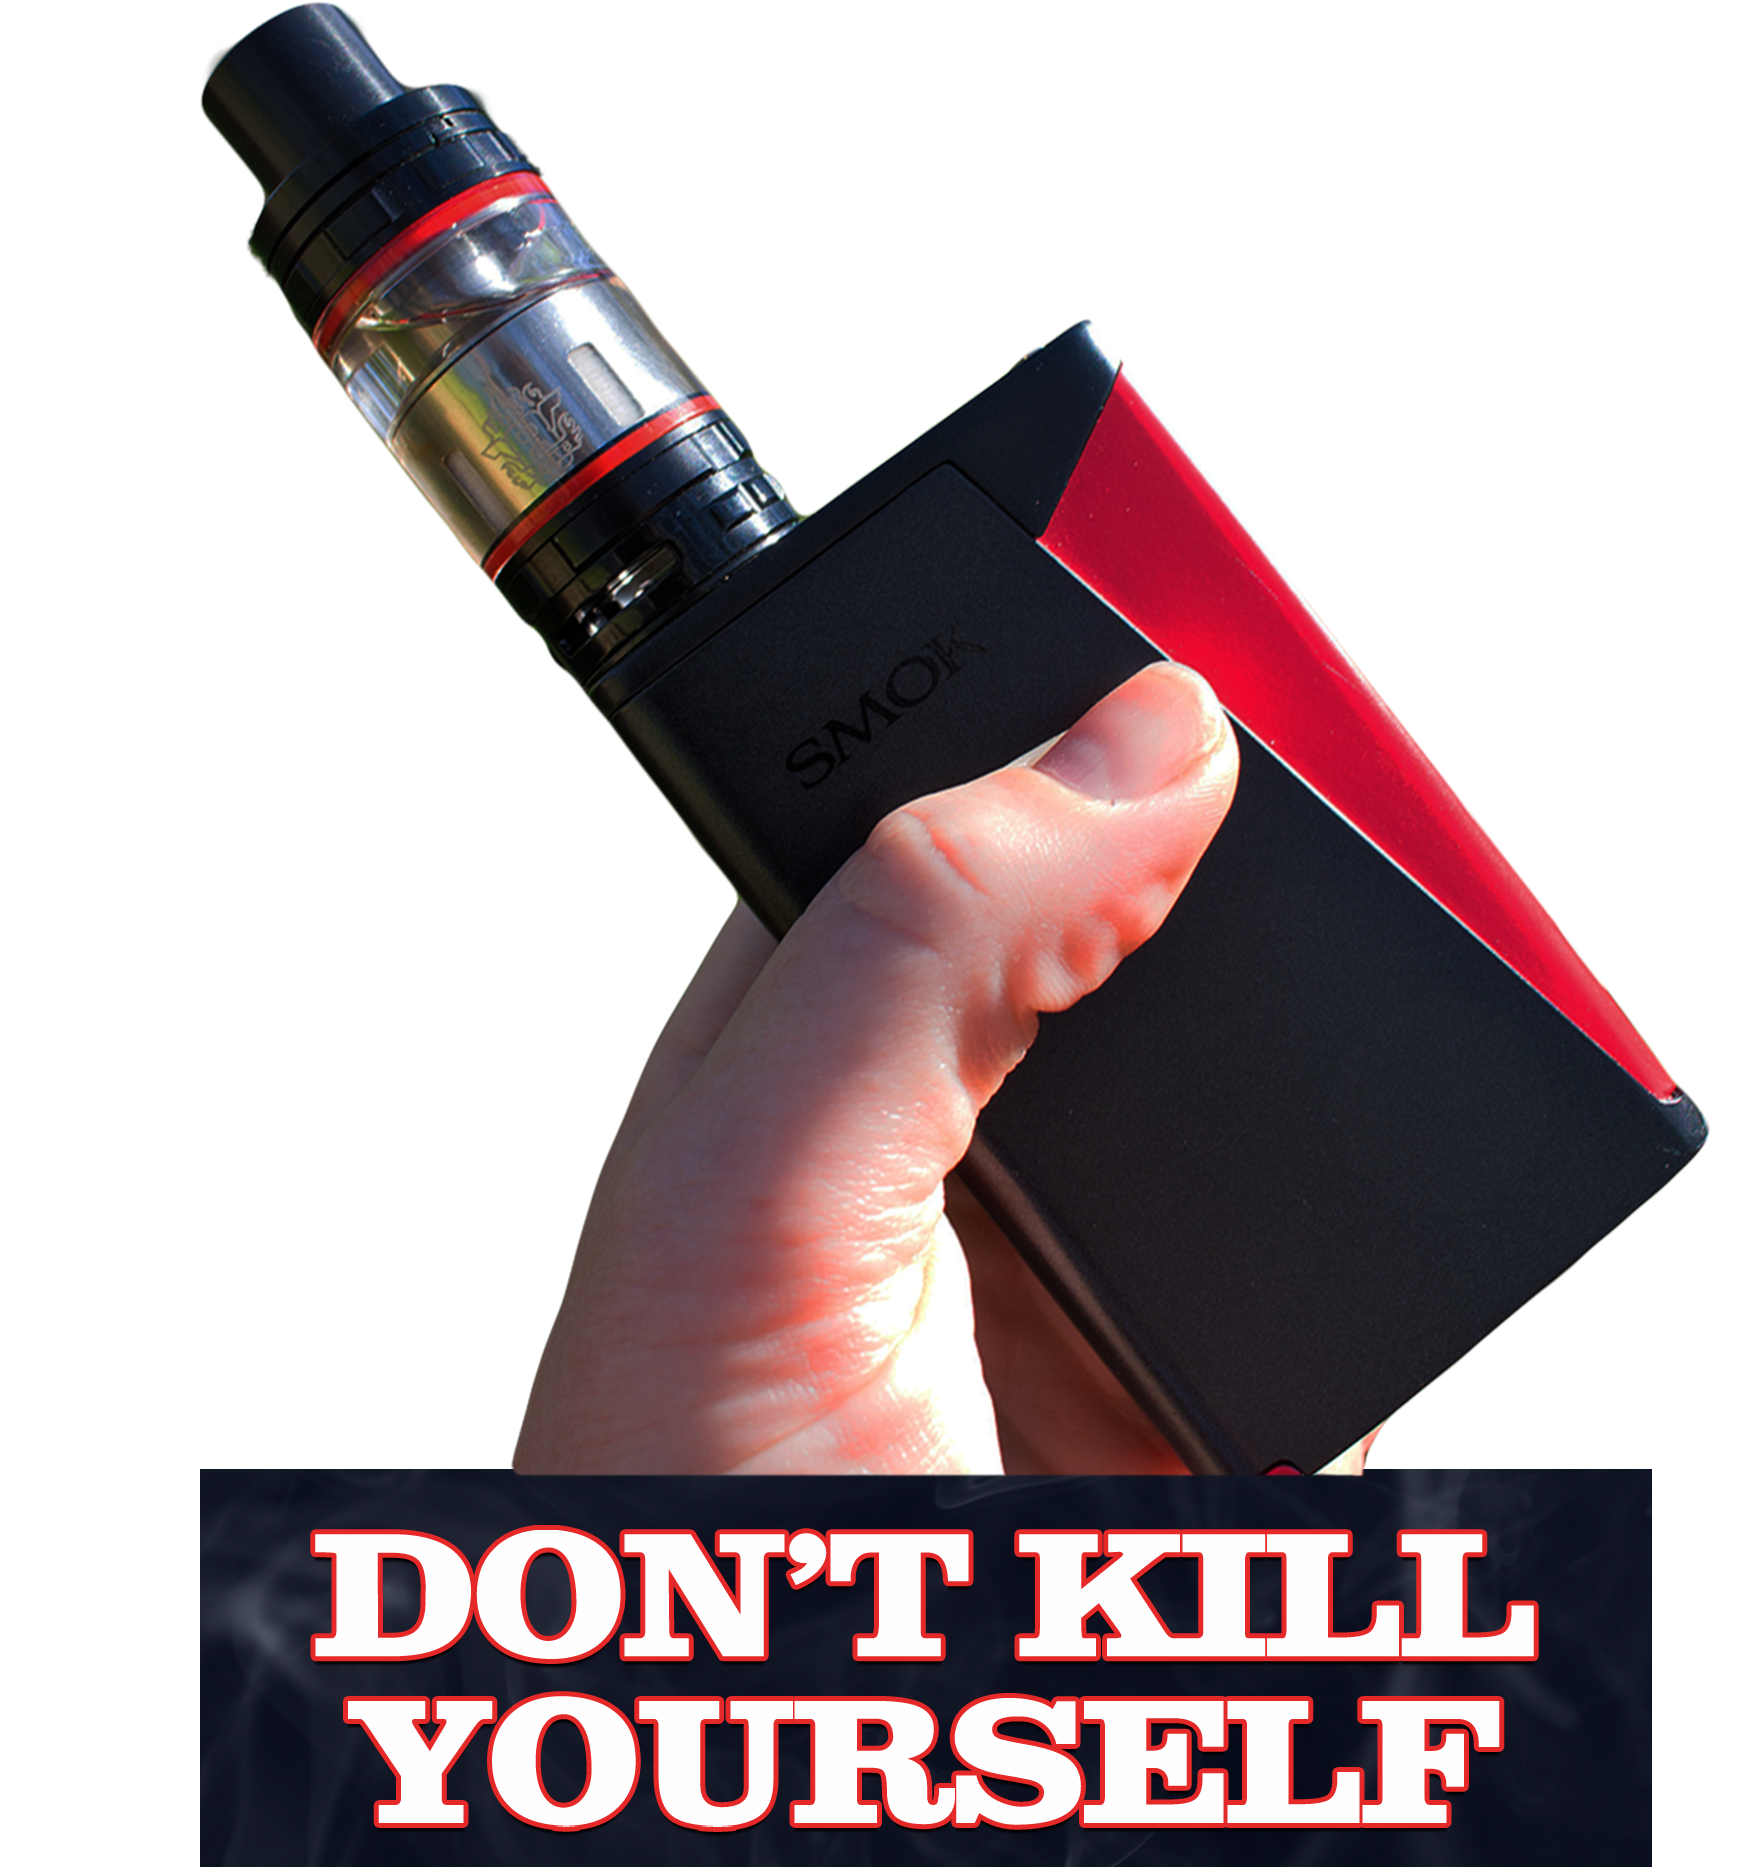 Vaping is Killing You